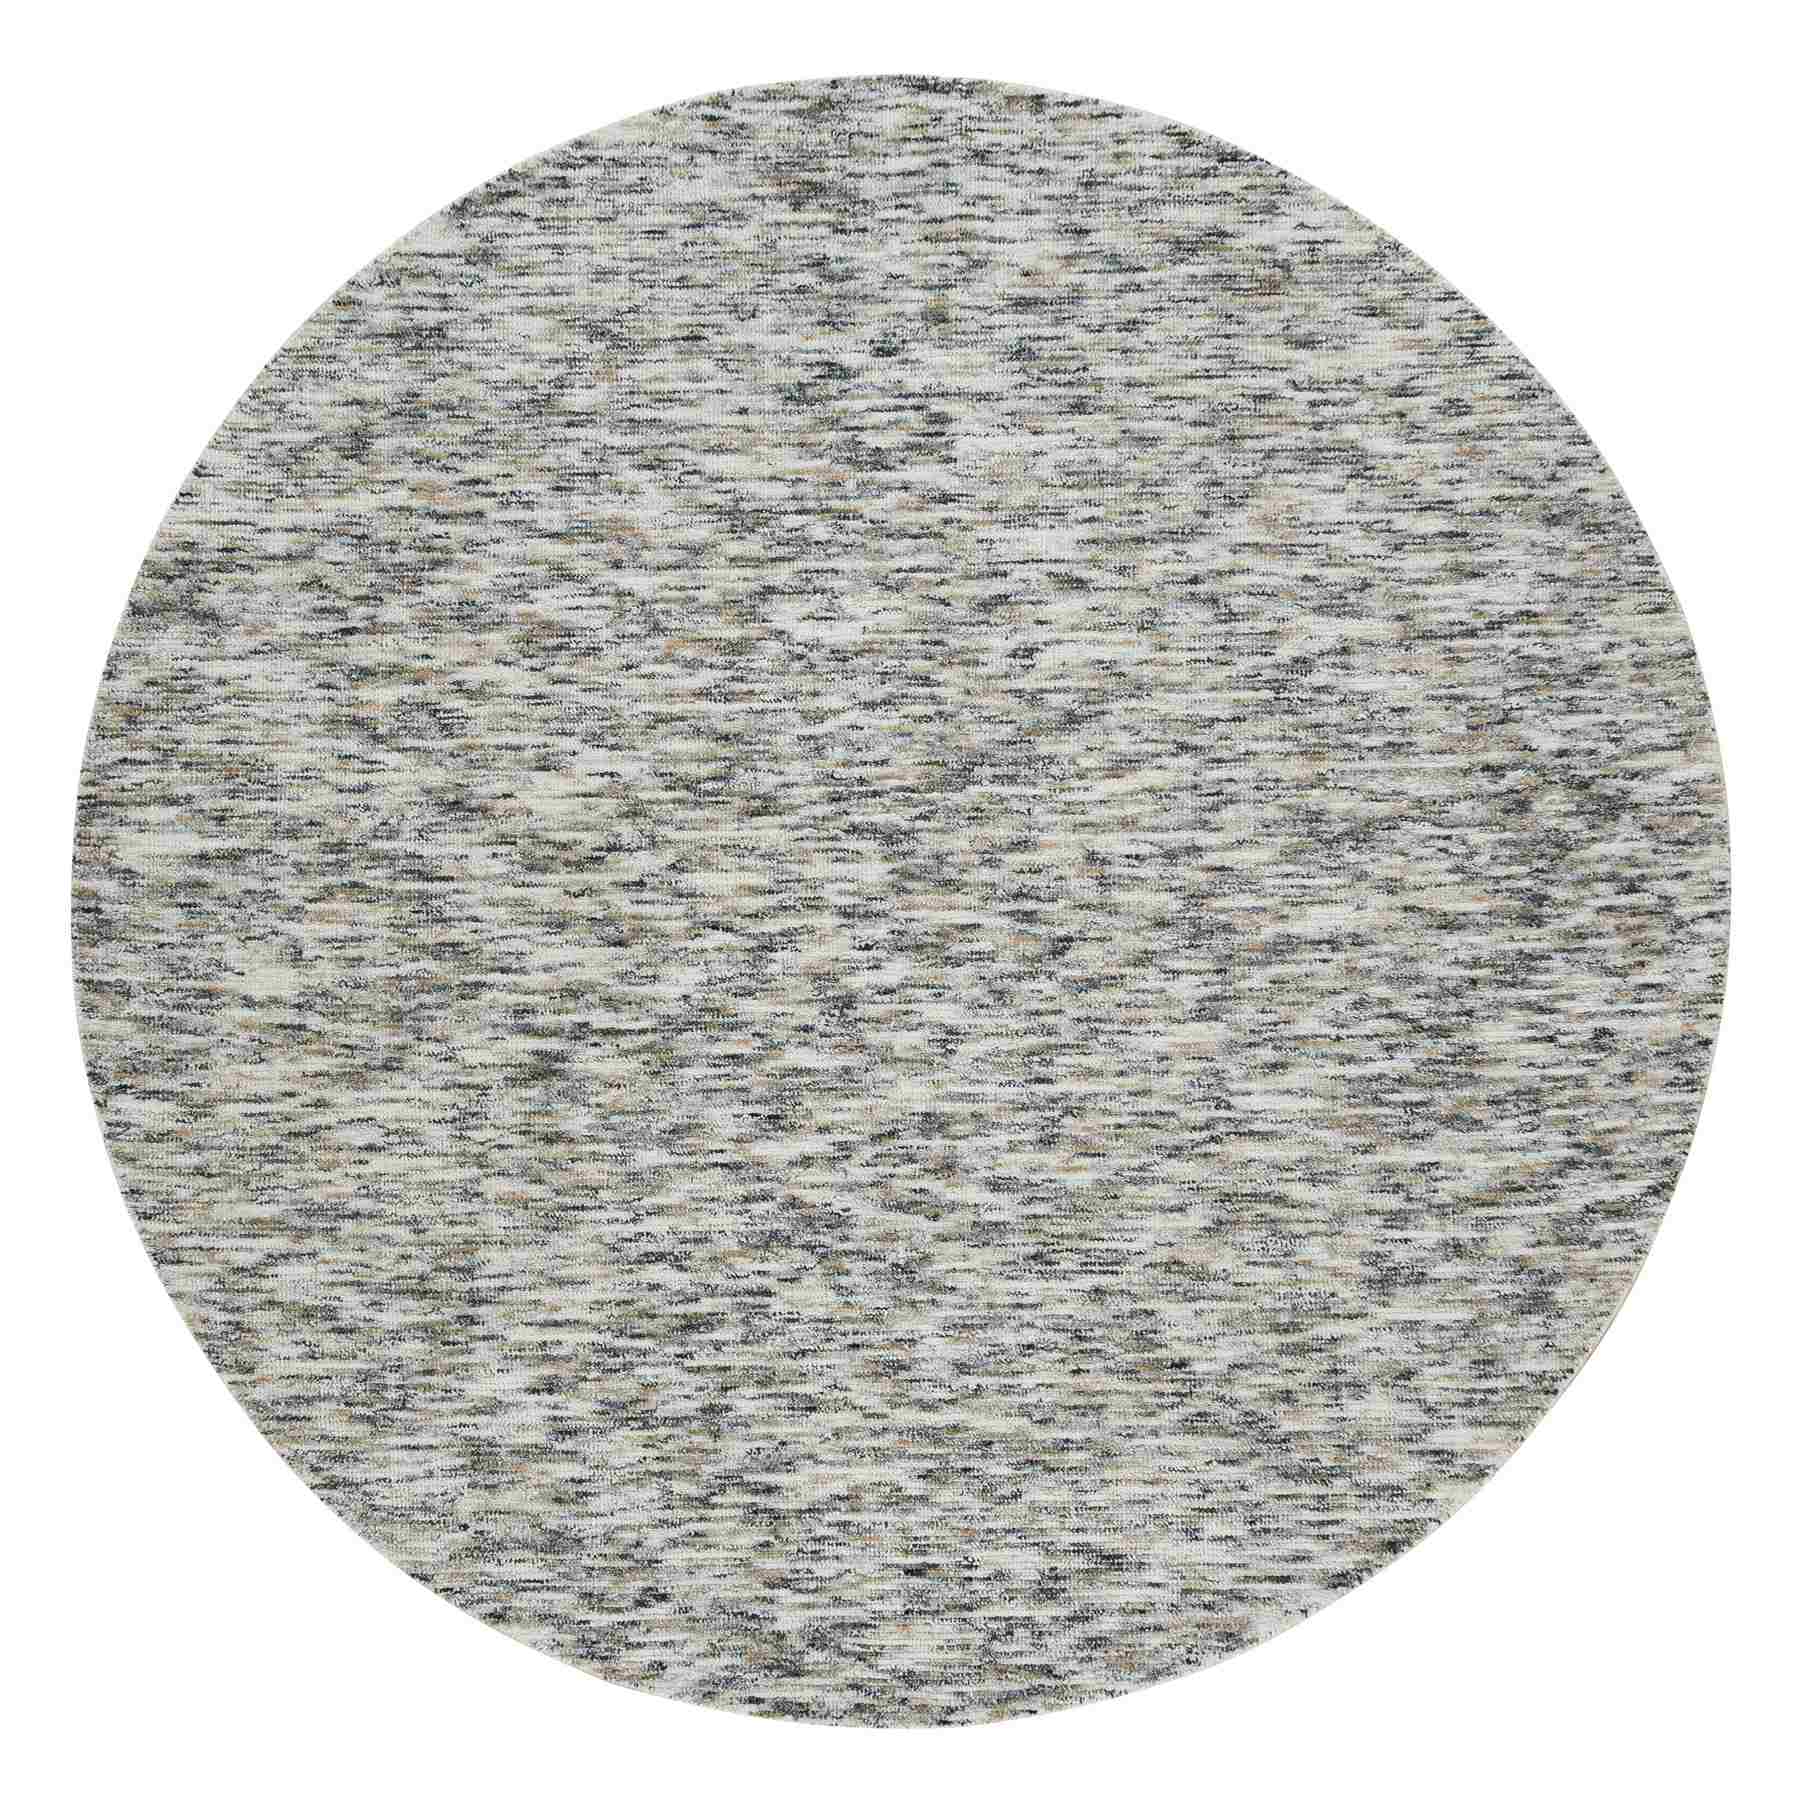 Earth Tone Colors, Pure Wool, Hand Loomed, Modern Striped Design, Soft to the Touch Round Oriental Rug